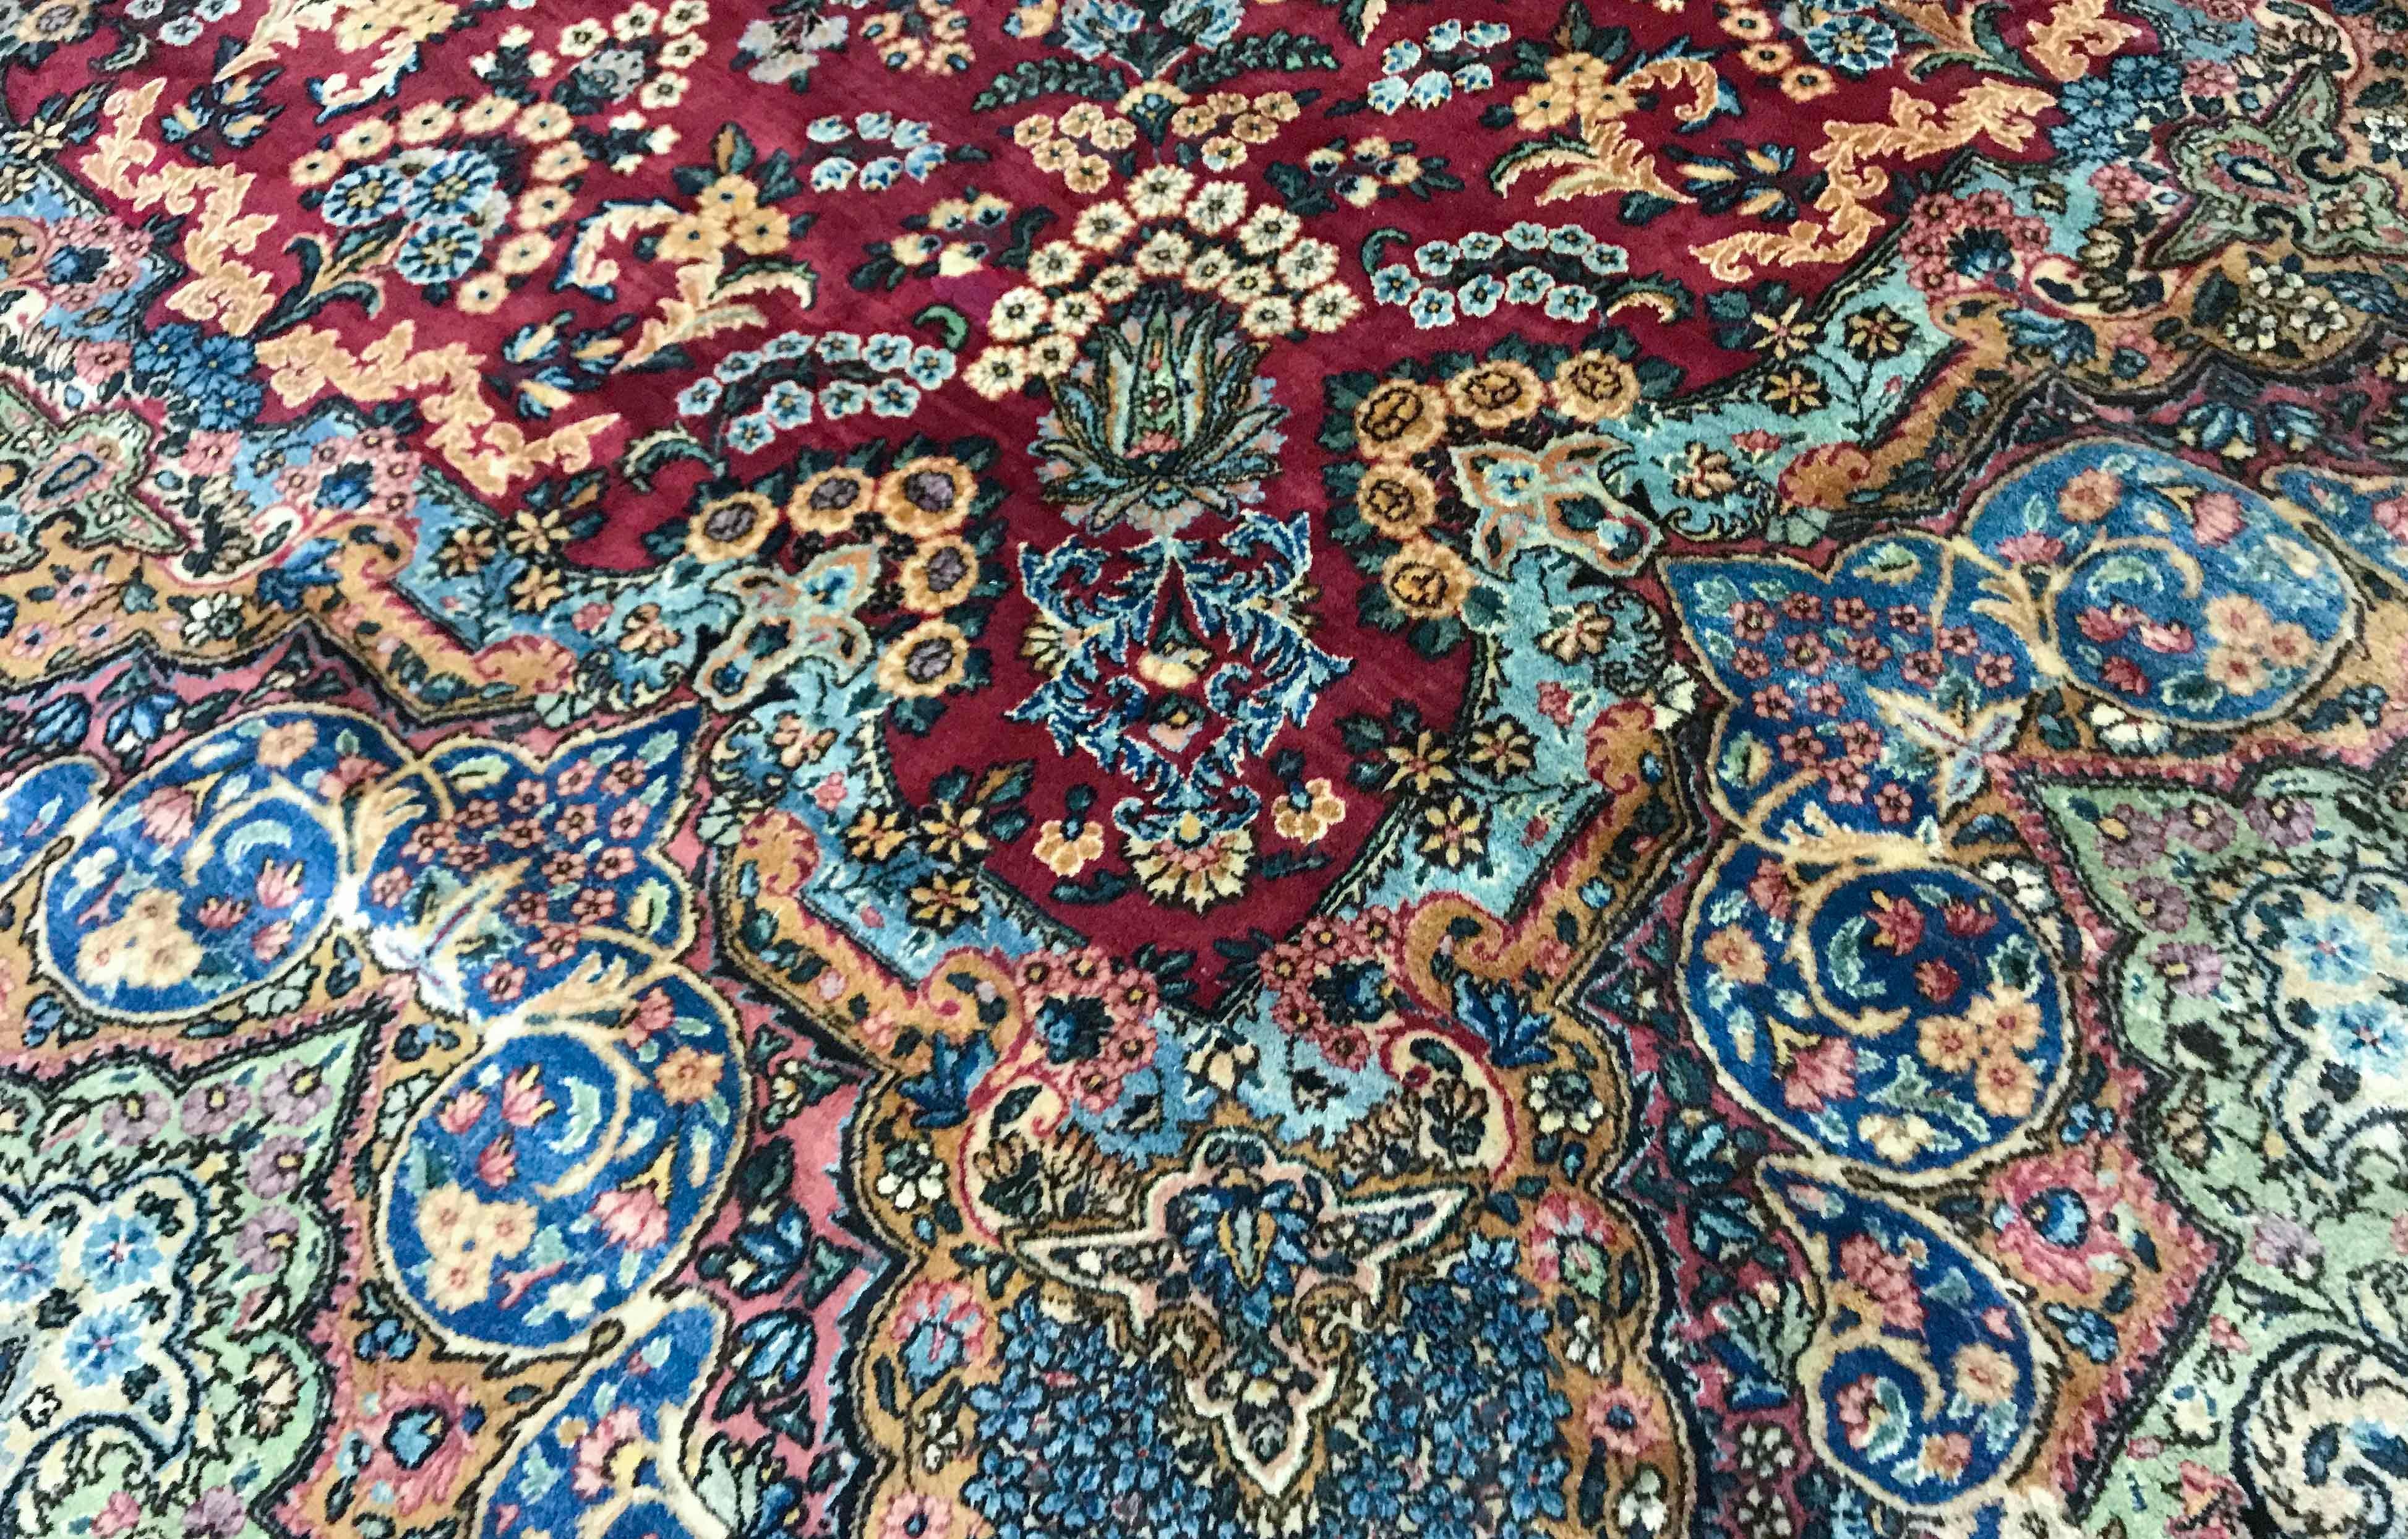 Vintage Persian Kerman rug, circa 1940. The astonishing detail in this rug is a testament to the master weavers who created the piece. The central red ground bursting with superb floral designs and enclosing a central shape resembling a piece of